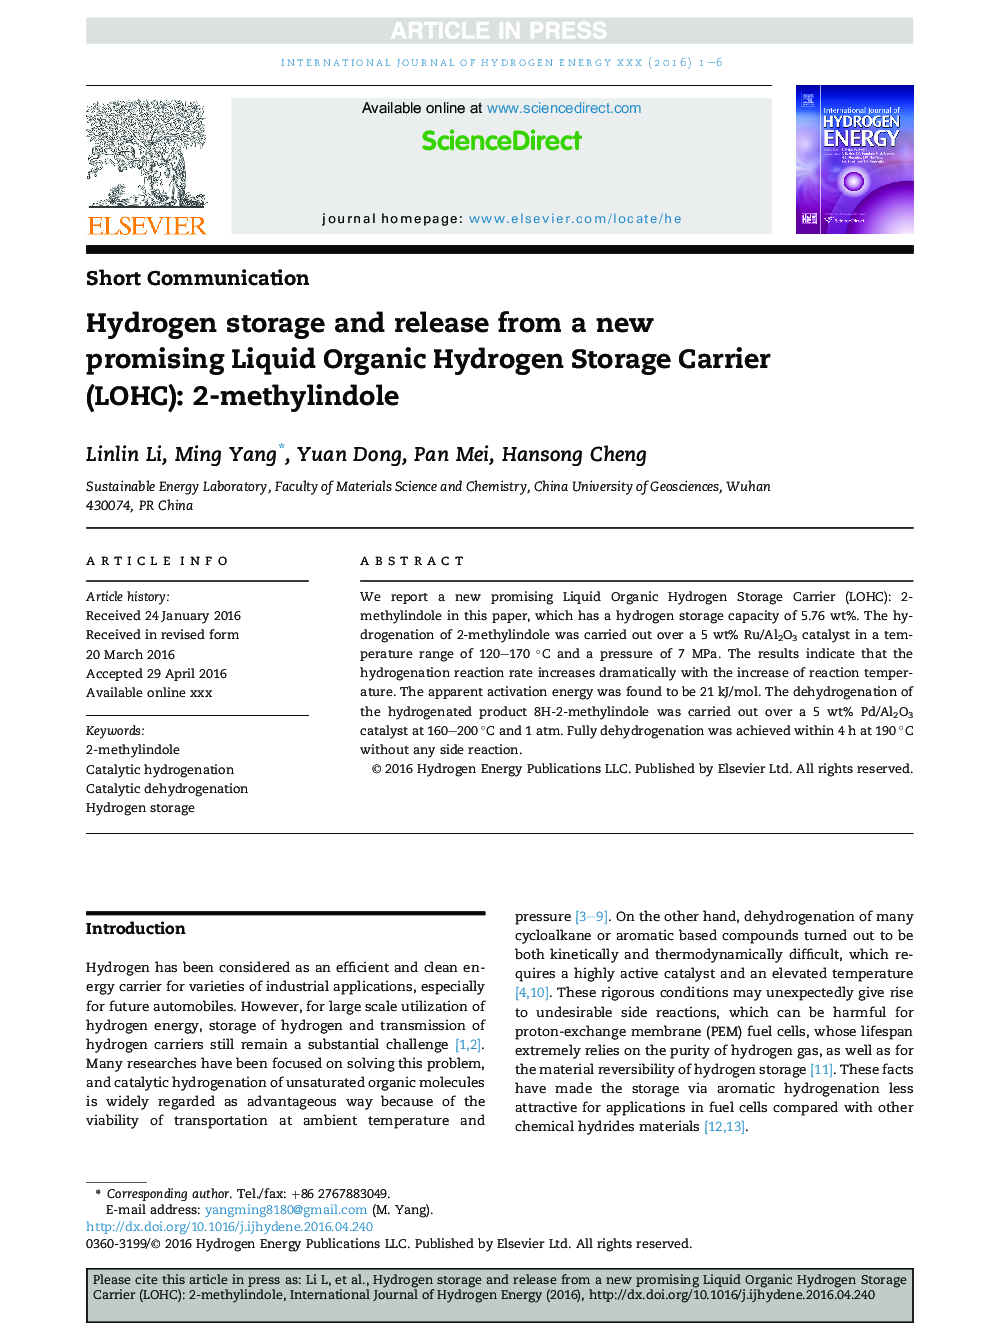 Hydrogen storage and release from a new promising Liquid Organic Hydrogen Storage Carrier (LOHC): 2-methylindole